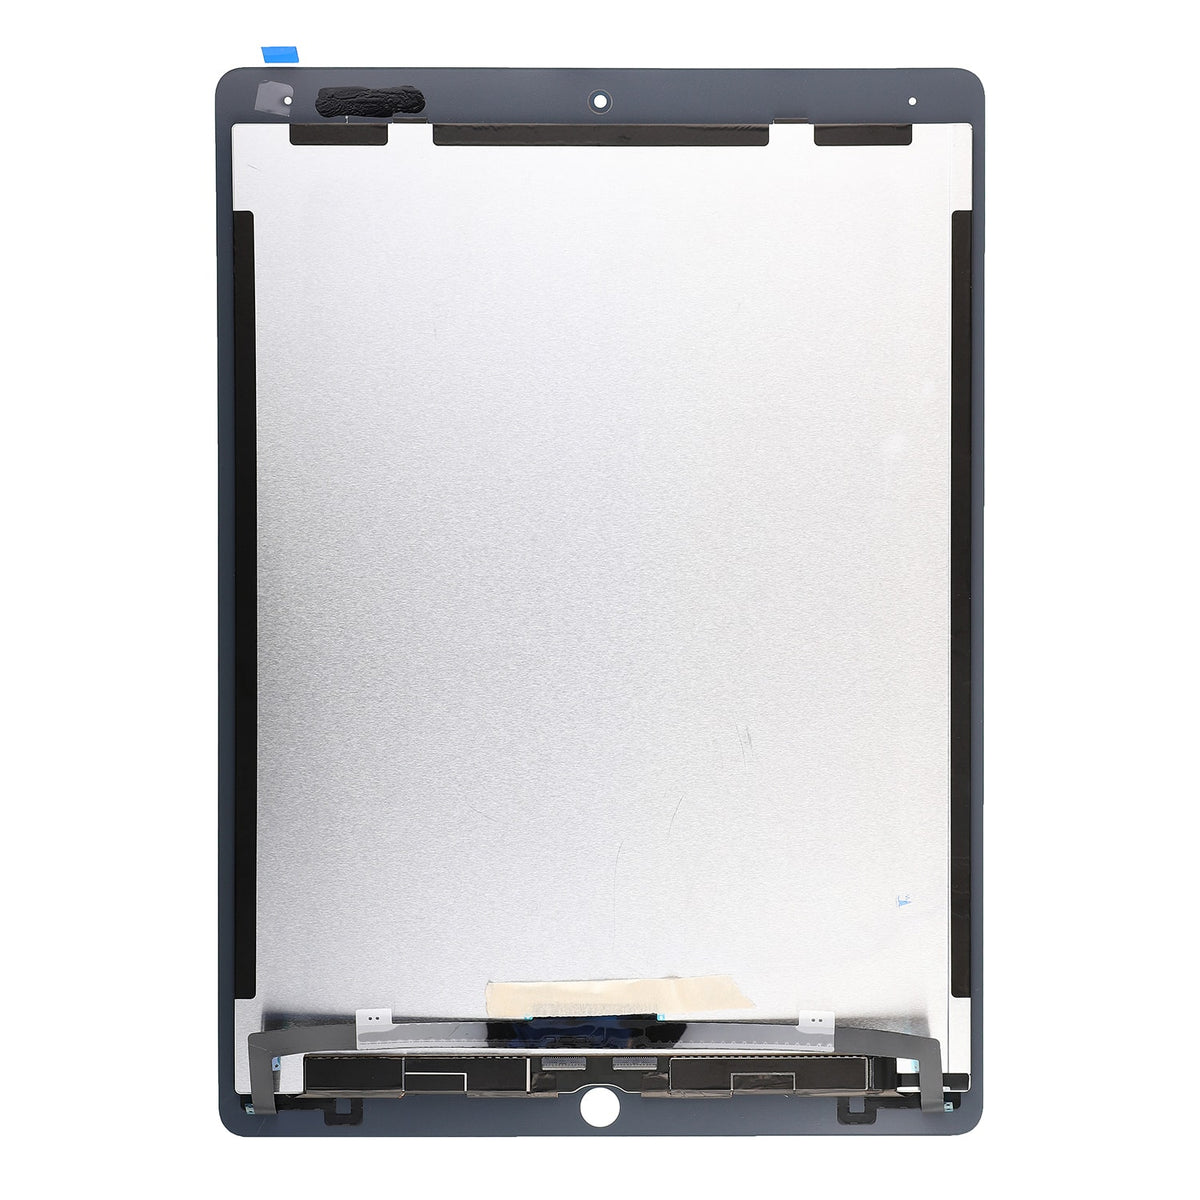 LCD WITH DIGITIZER ASSEMBLY FOR IPAD PRO 12.9" 2ND GEN- WHITE